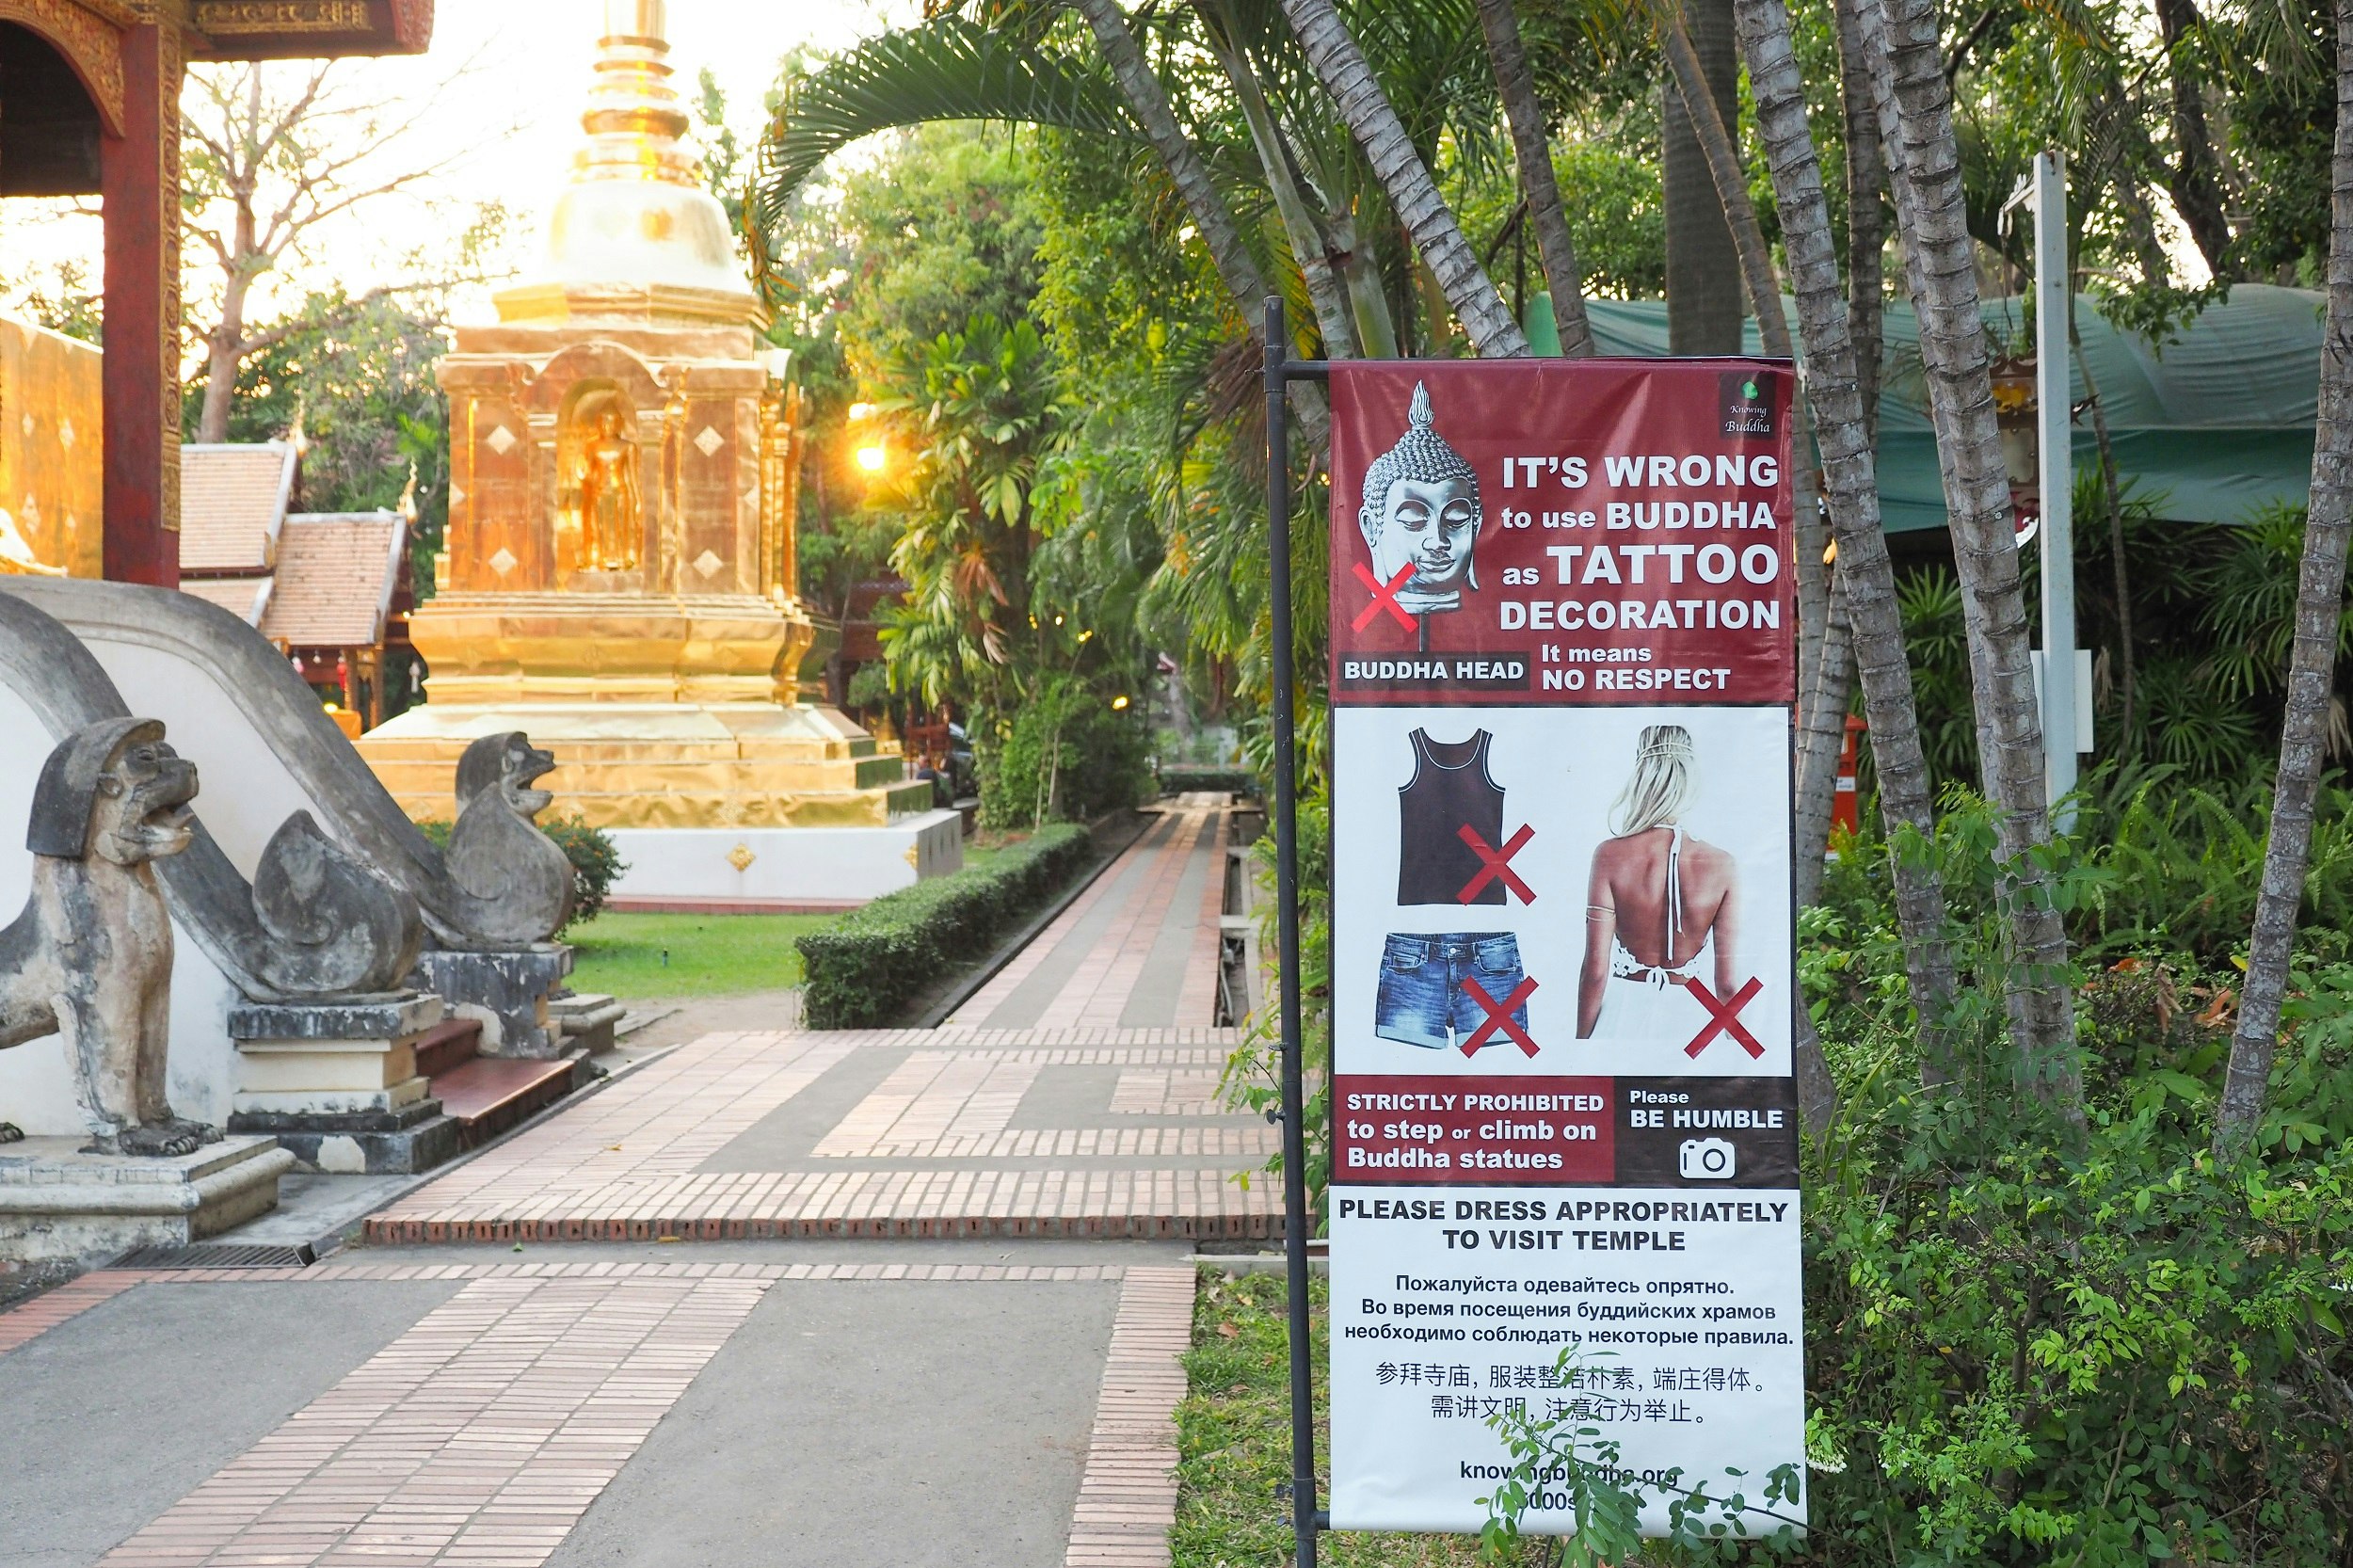 A poster near the entrance to temple grounds states "It's wrong to use Buddha as tattoo decoration". It has pictures of inappropriate dress (shorts and vests) with large red crosses next to them.